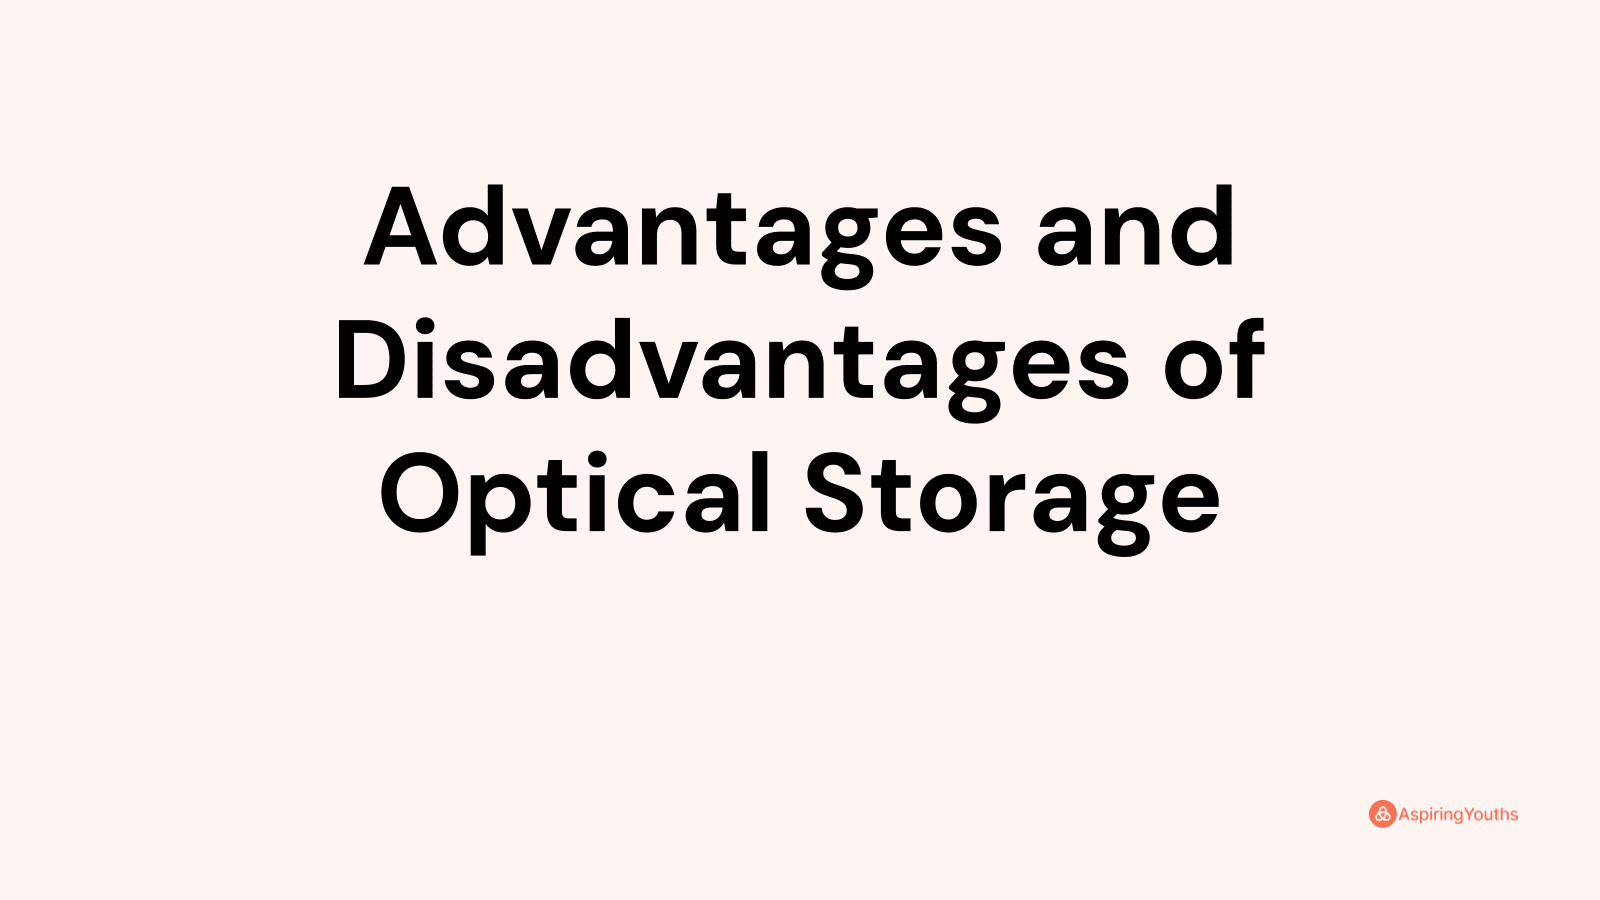 Advantages and disadvantages of Optical Storage